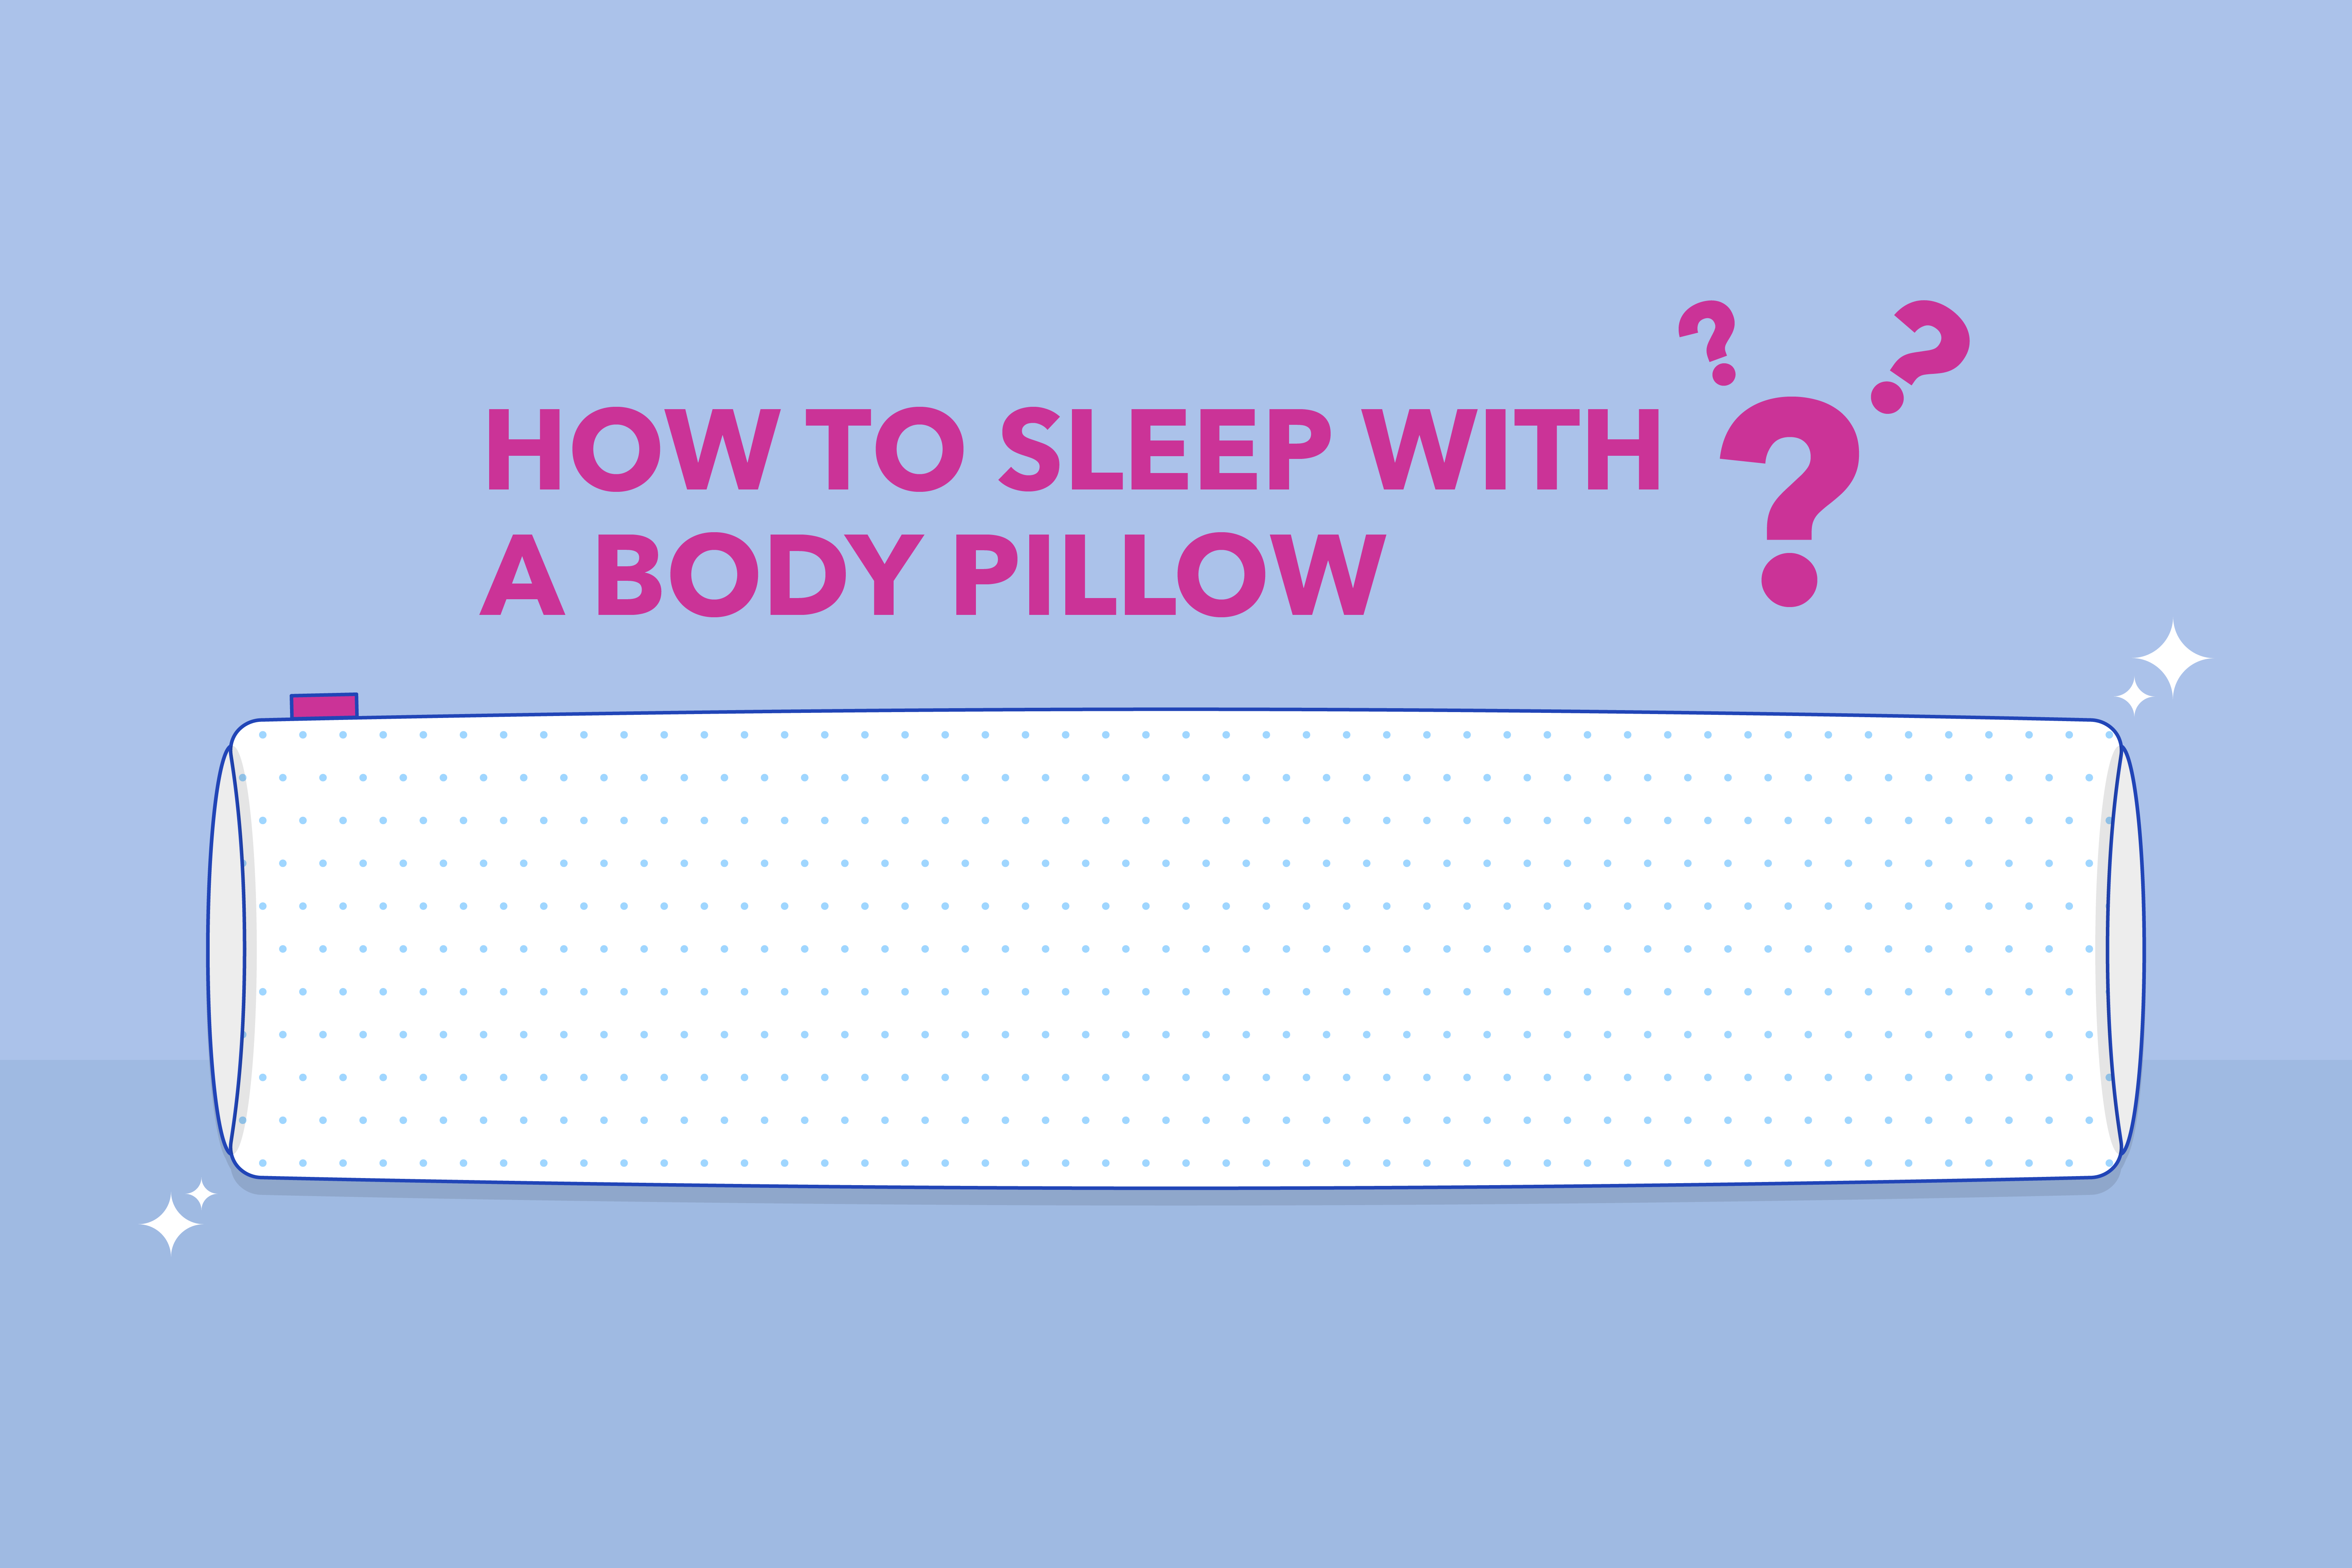 https://eachnight.com/wp-content/uploads/2022/10/how-to-sleep-with-a-body-pillow-en.png